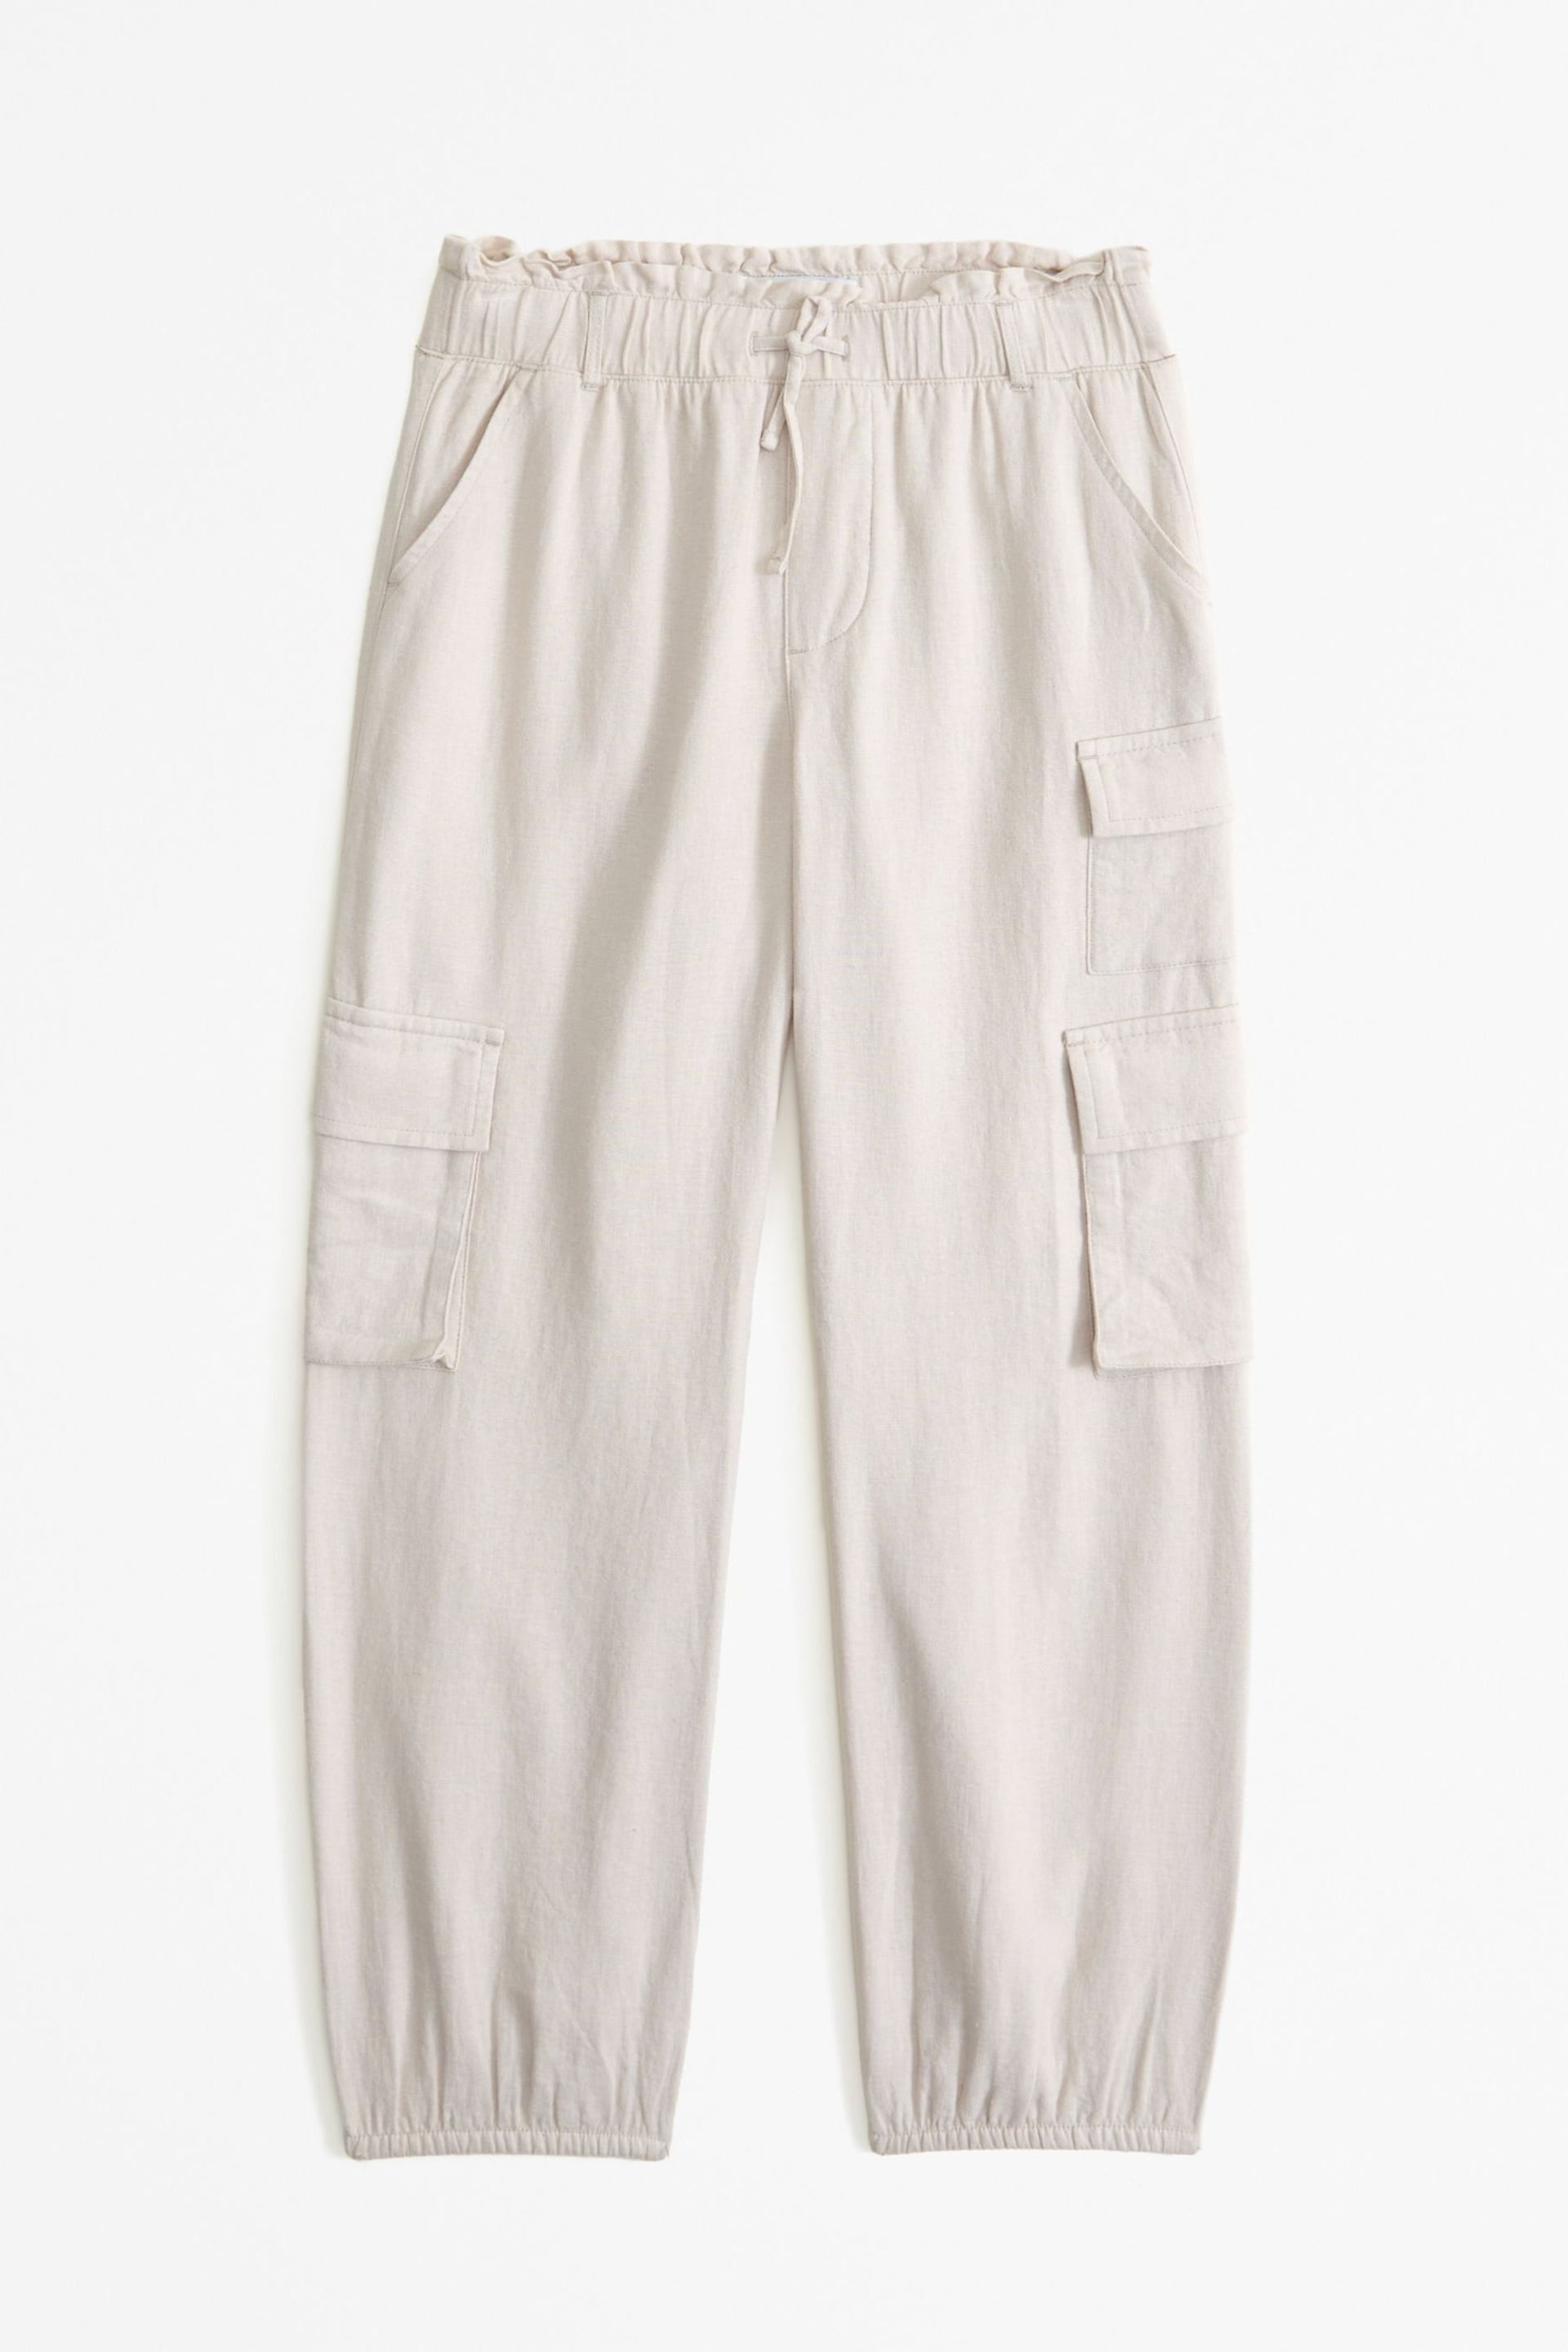 Abercrombie & Fitch Cream Linen Cargo Joggers With Pockets - Image 7 of 7